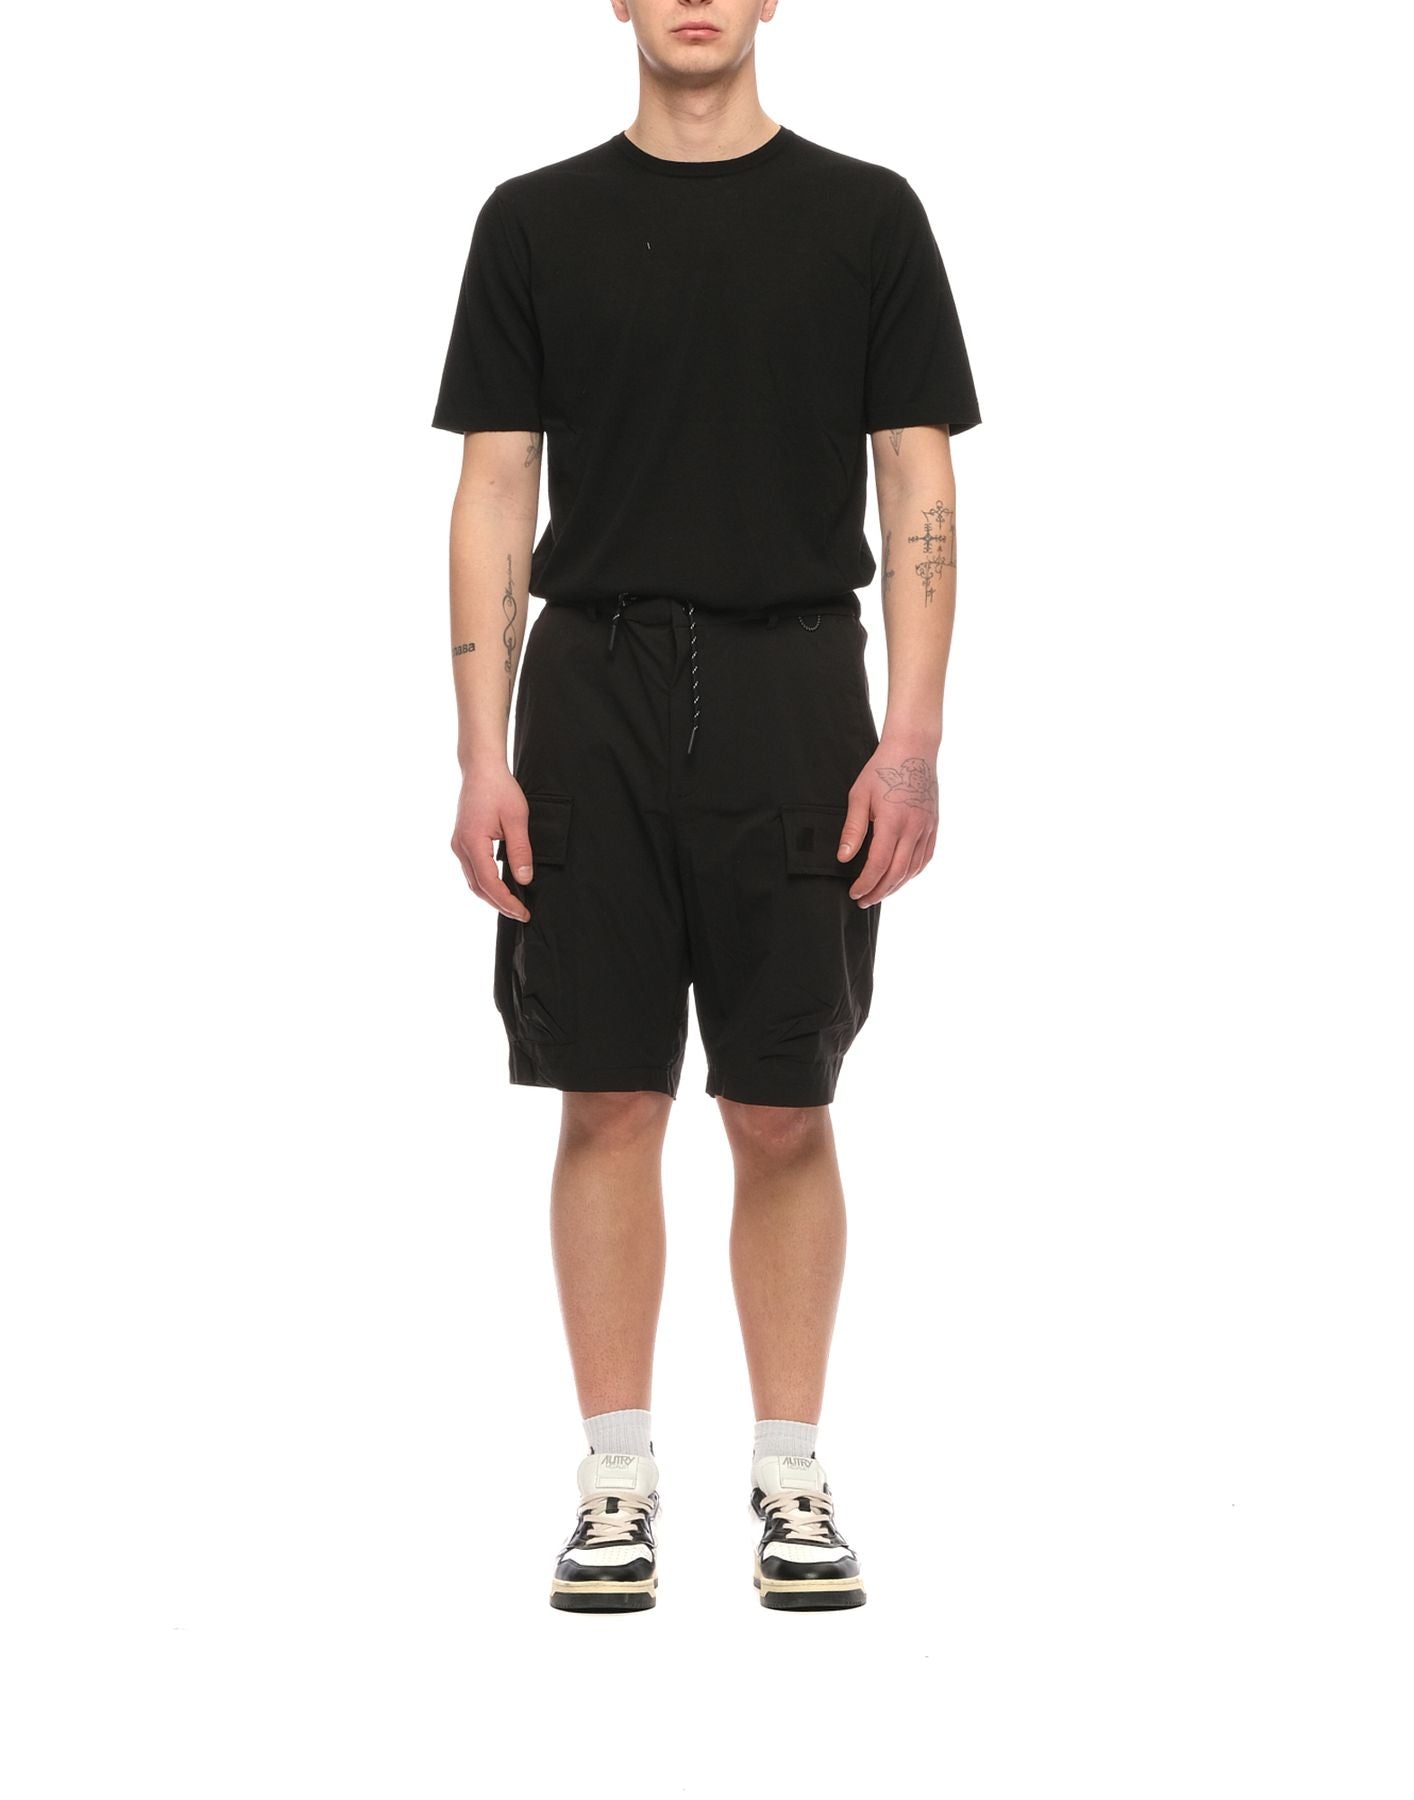 Shorts Man EOTM216AE42 Negro OUTHERE